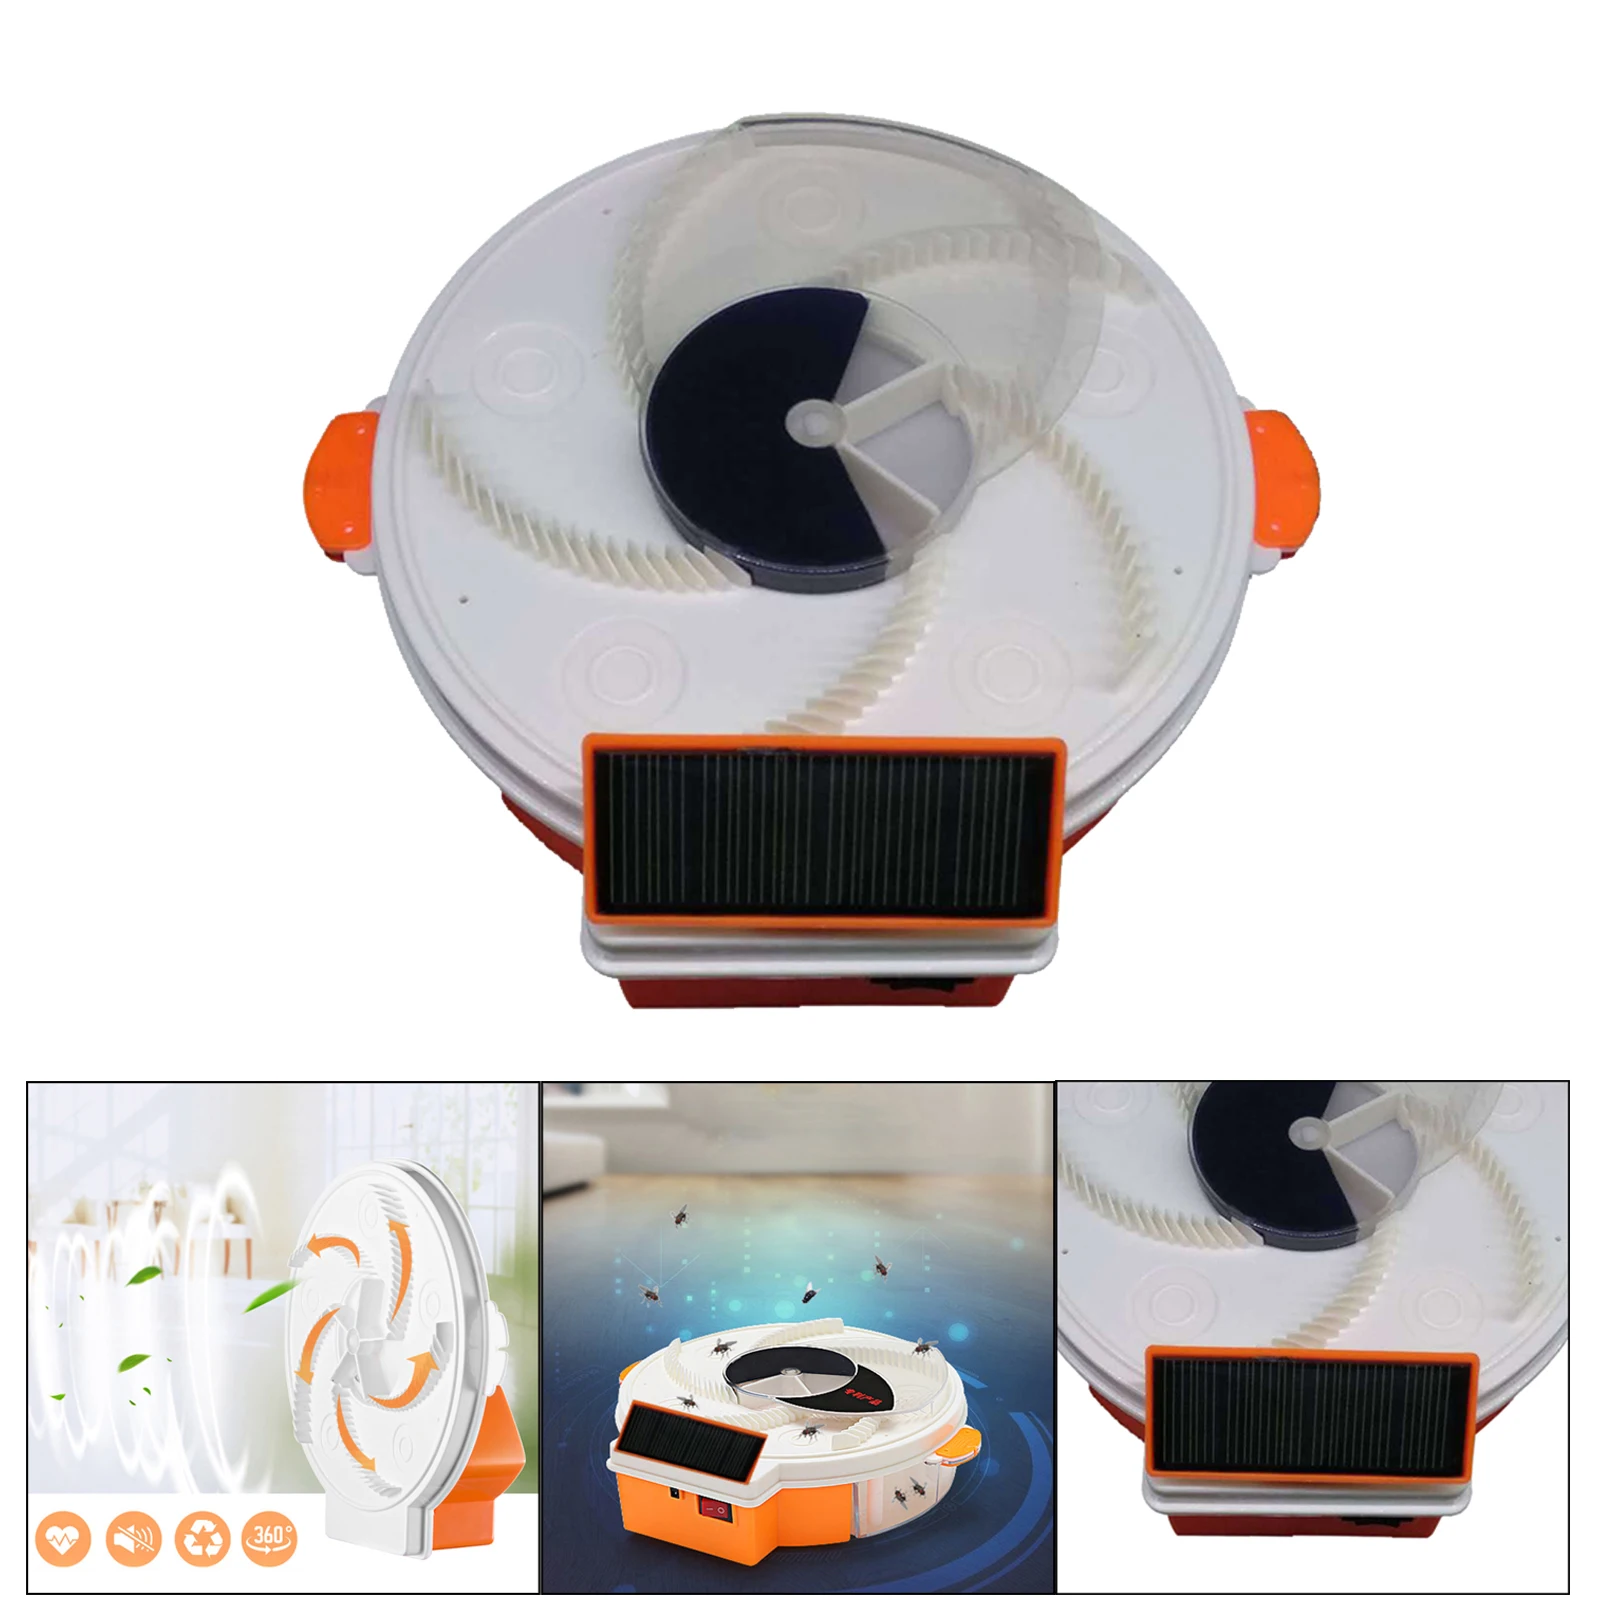 Solar Powered Electric Fly Trap Flycatcher USB Charging Fly Trap Reject Control Catcher Insect Repellents Tools